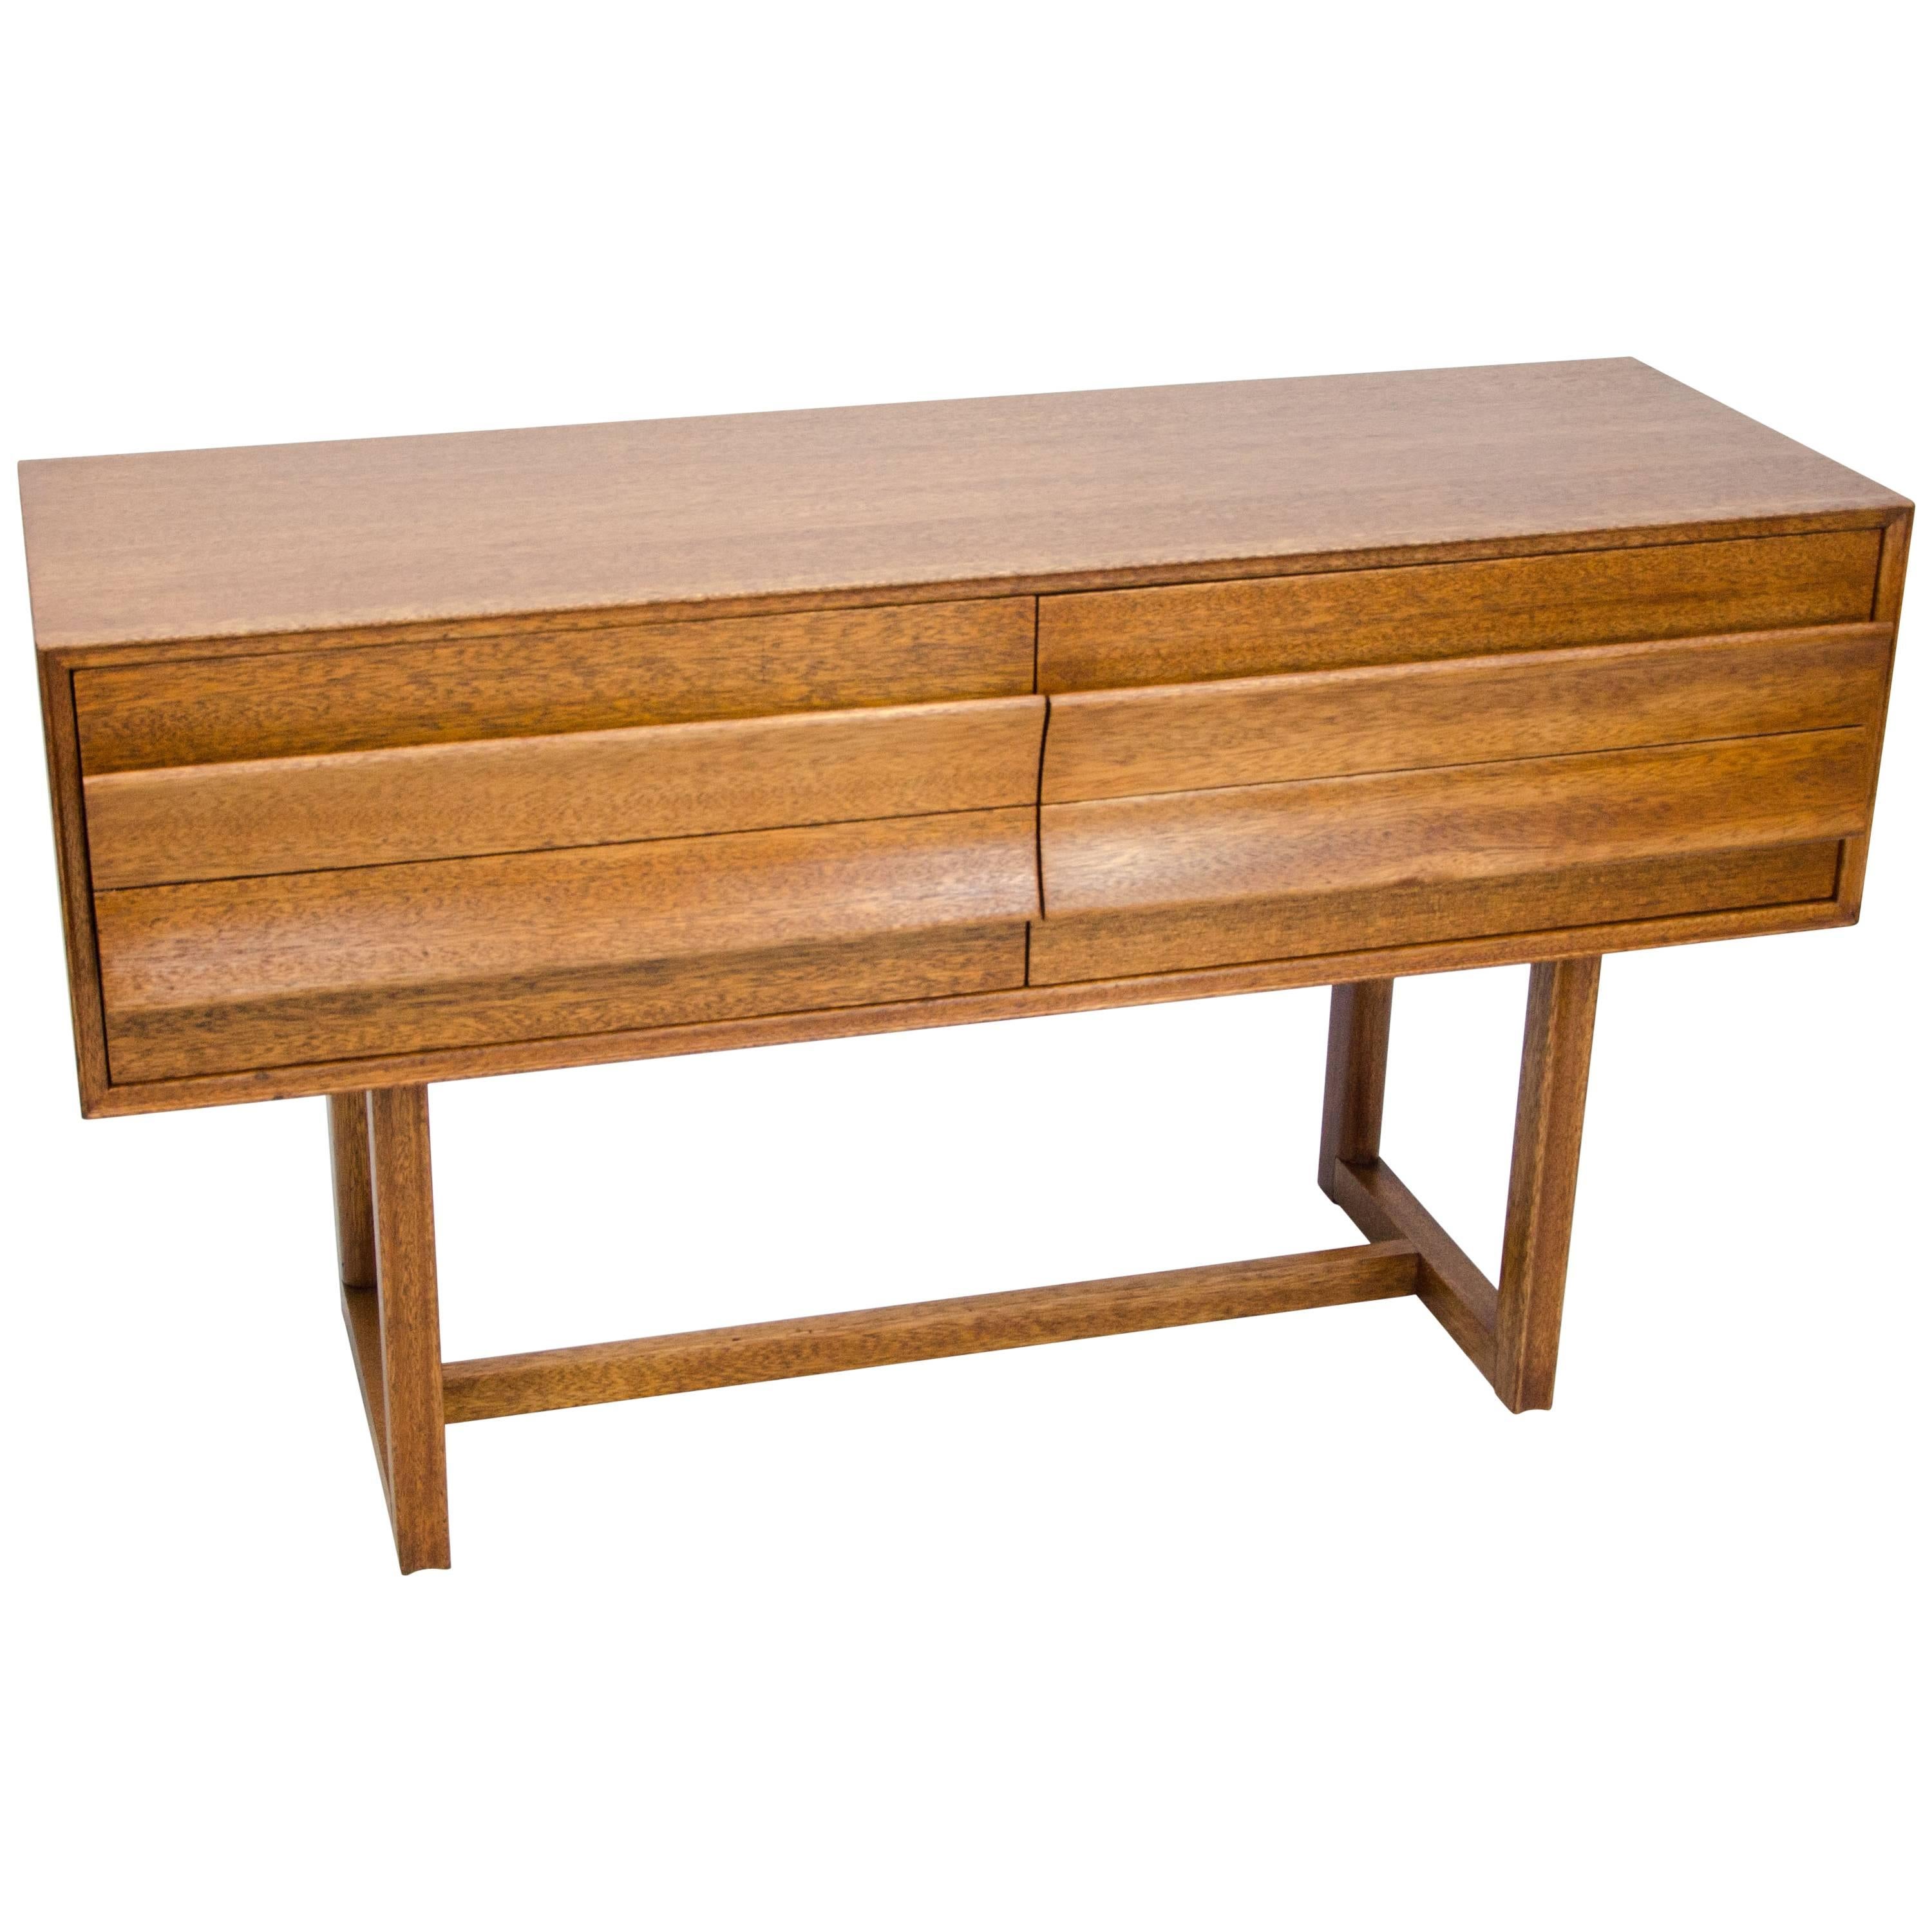 Console Buffet Table with Drawers. Paul Laszlo for Brown & Saltman of California